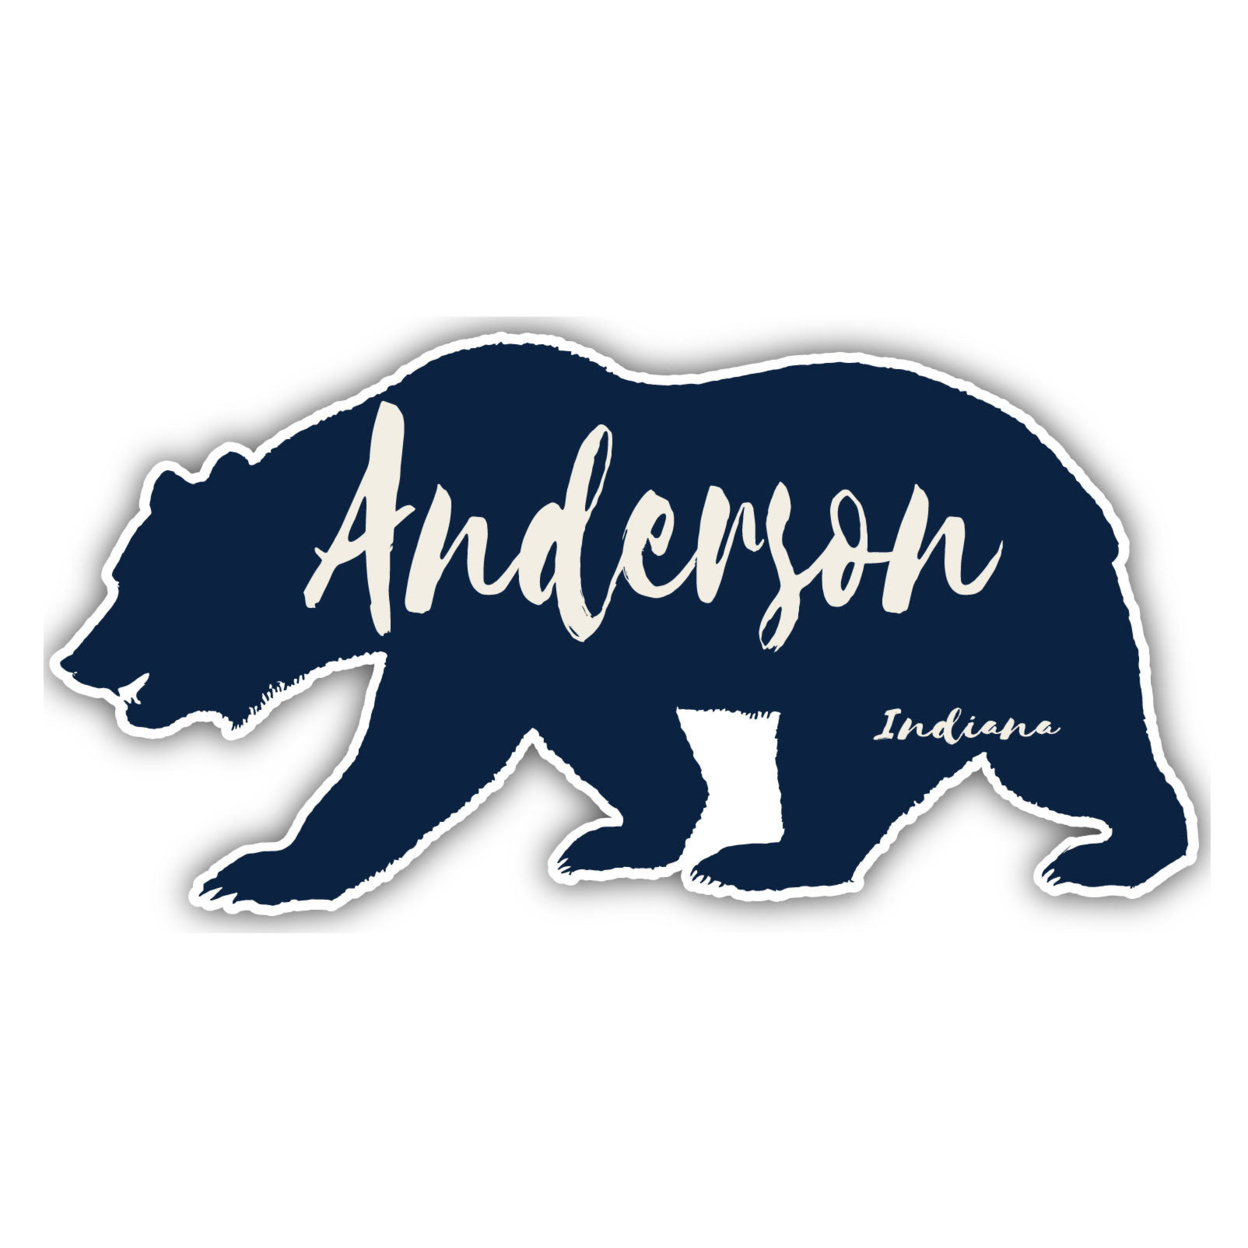 Anderson Indiana Souvenir Decorative Stickers (Choose Theme And Size) - Single Unit, 4-Inch, Bear